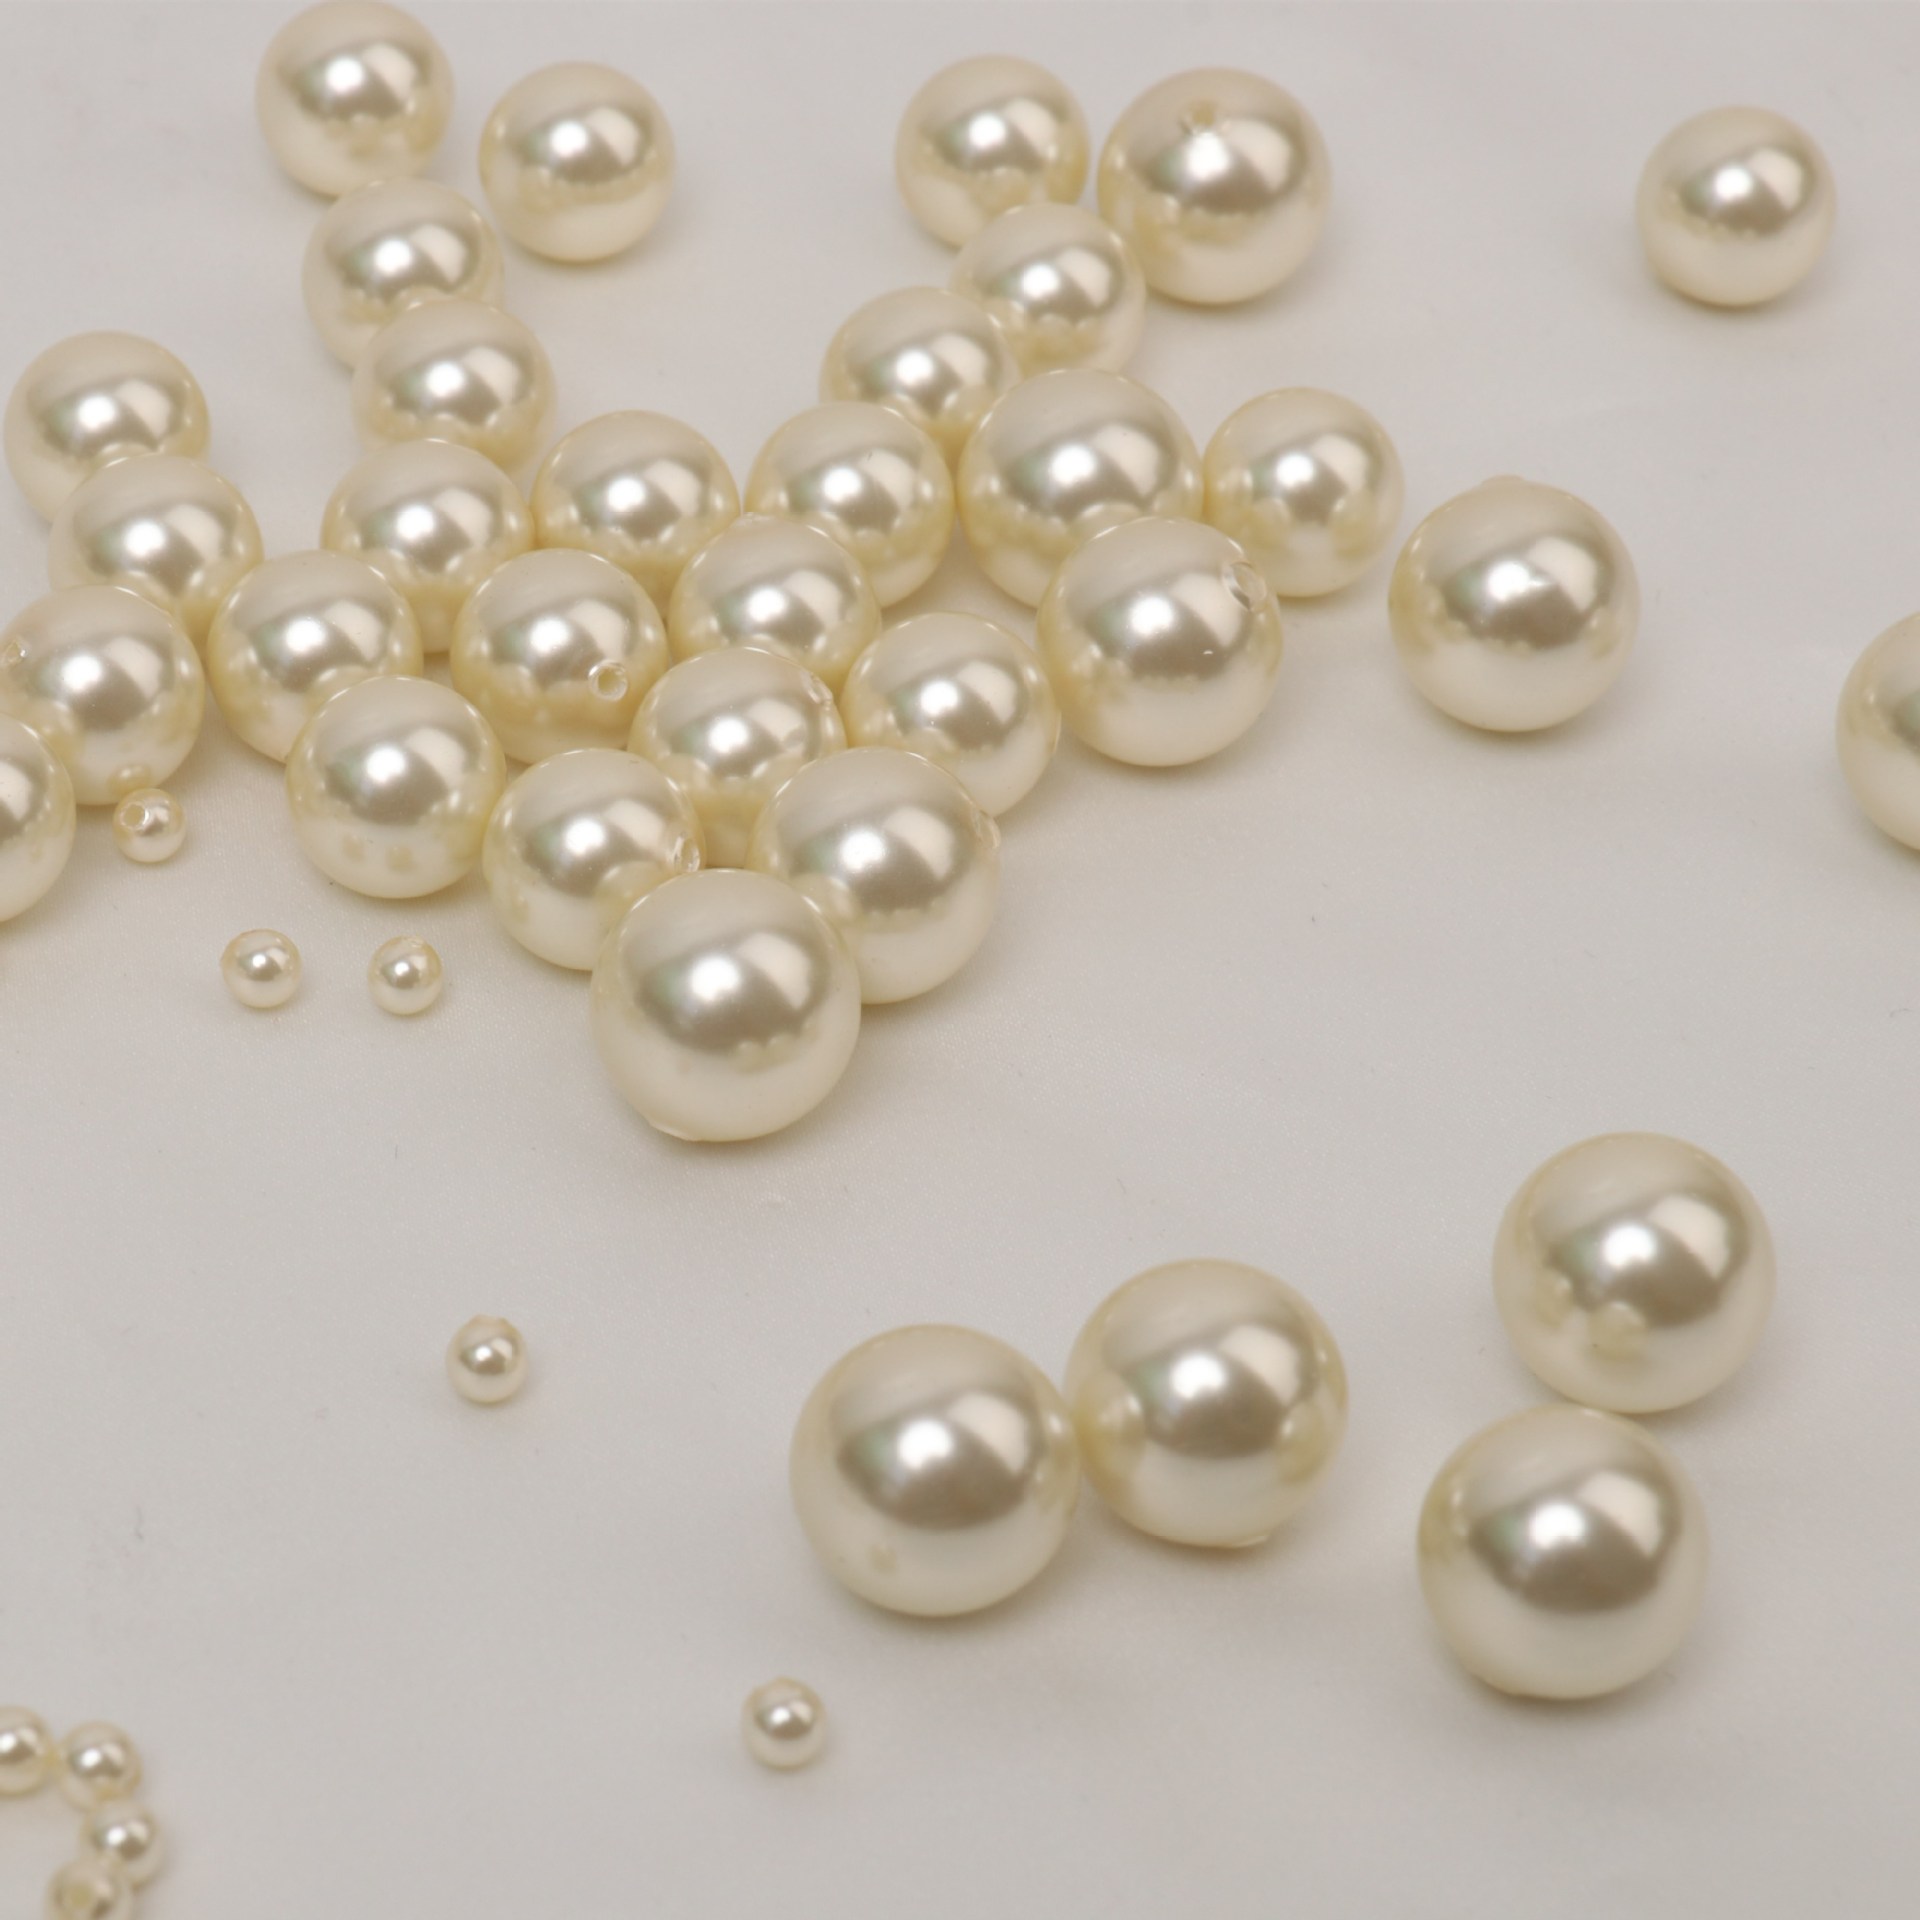 Pearl off-white 18mm